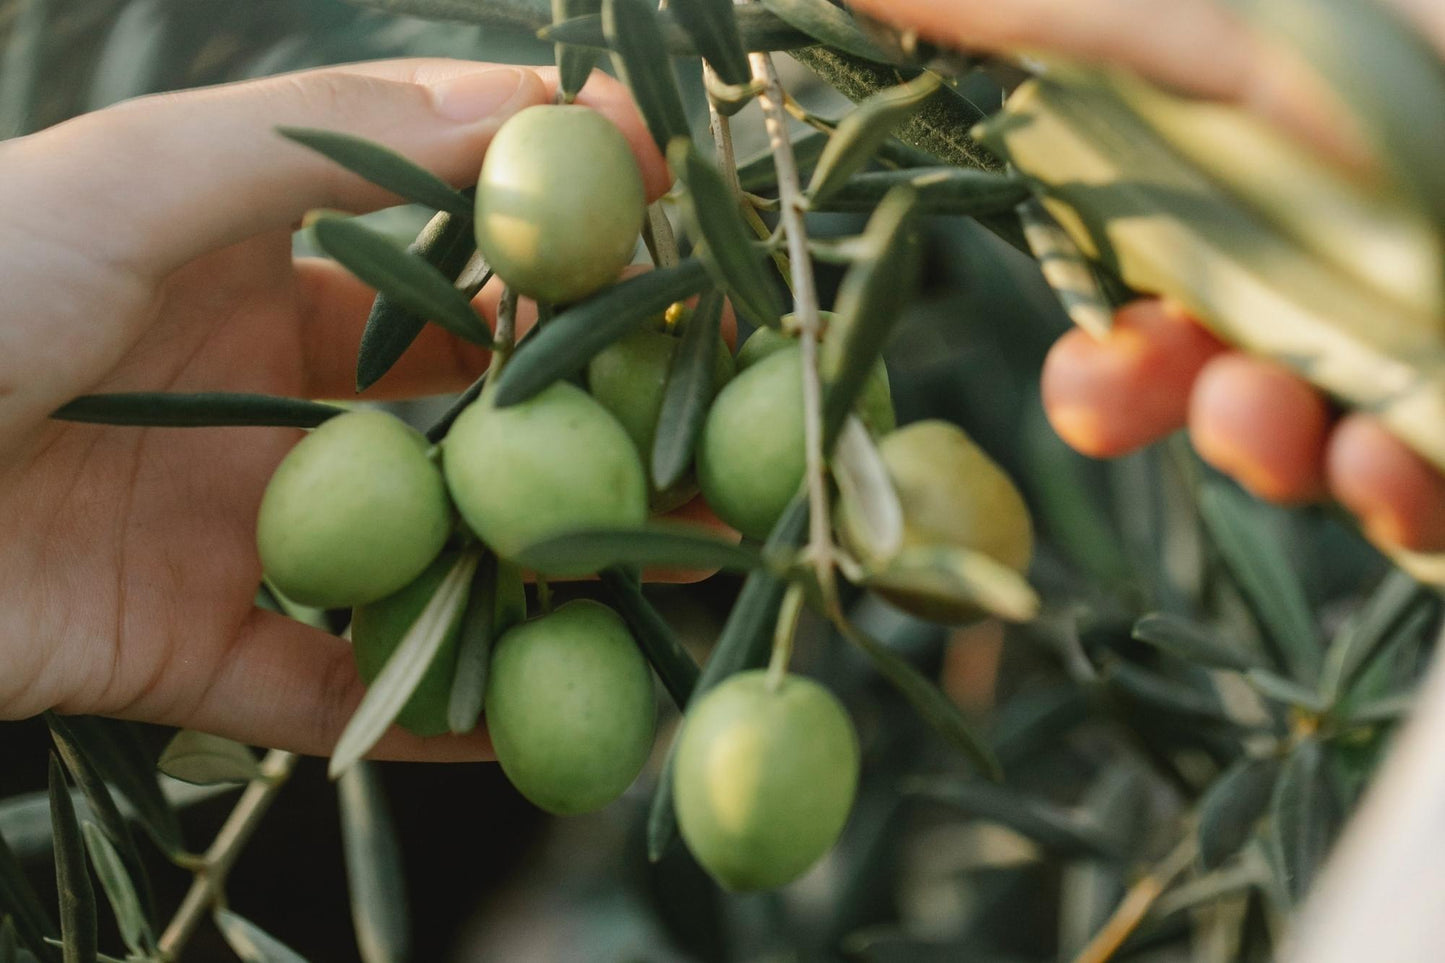 Olioveto: The Harvest – Exquisite Olive Oil in the Making